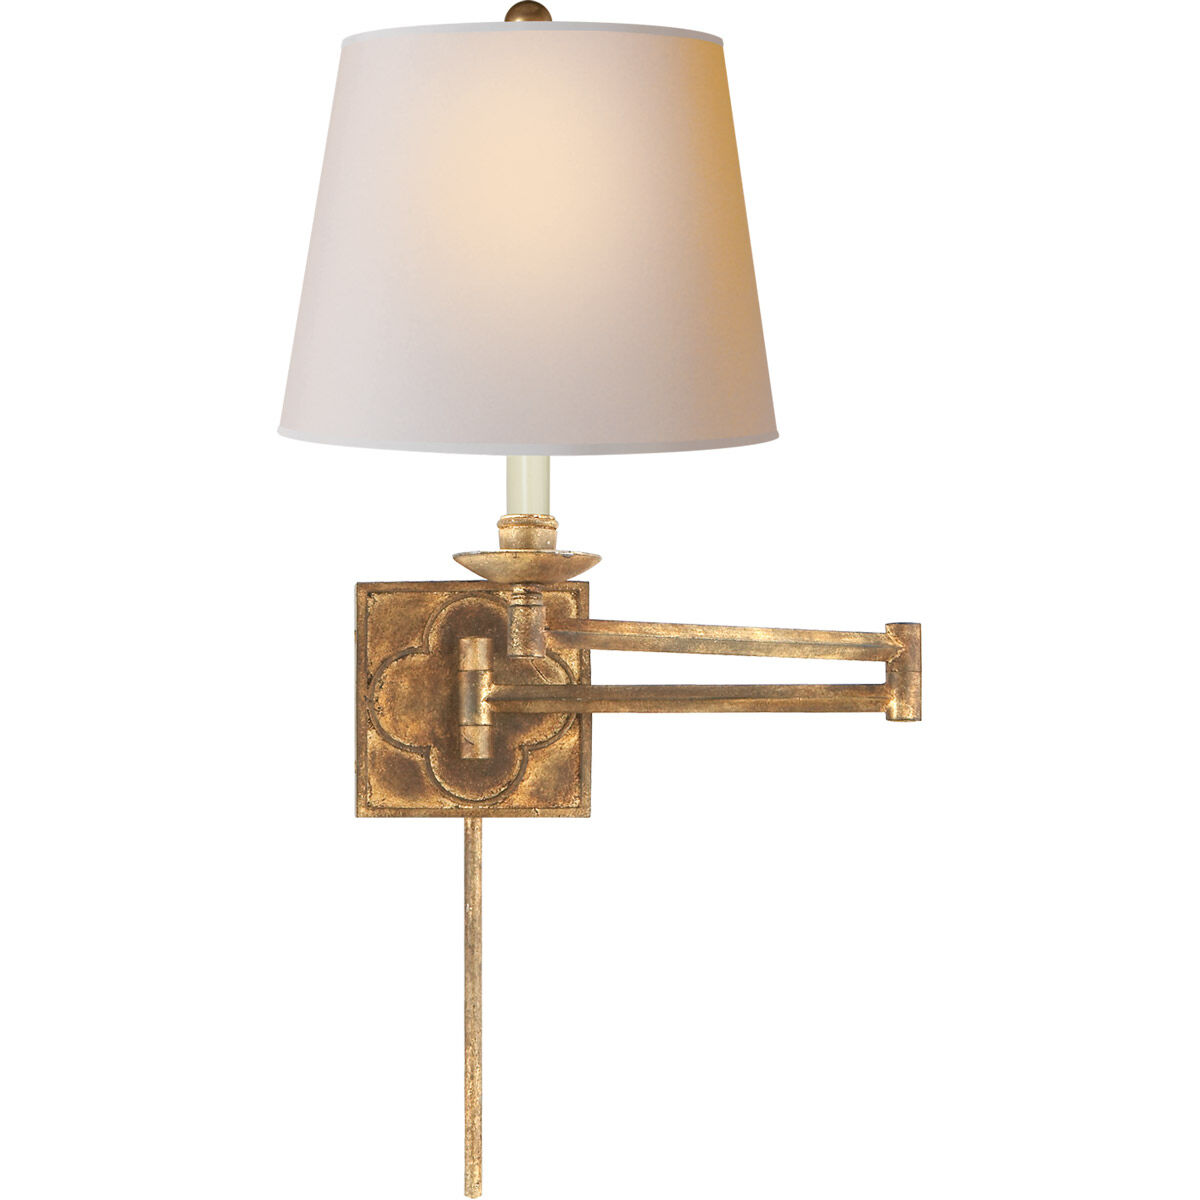 Suzanne Kasler Griffith Swing Arm Wall Light